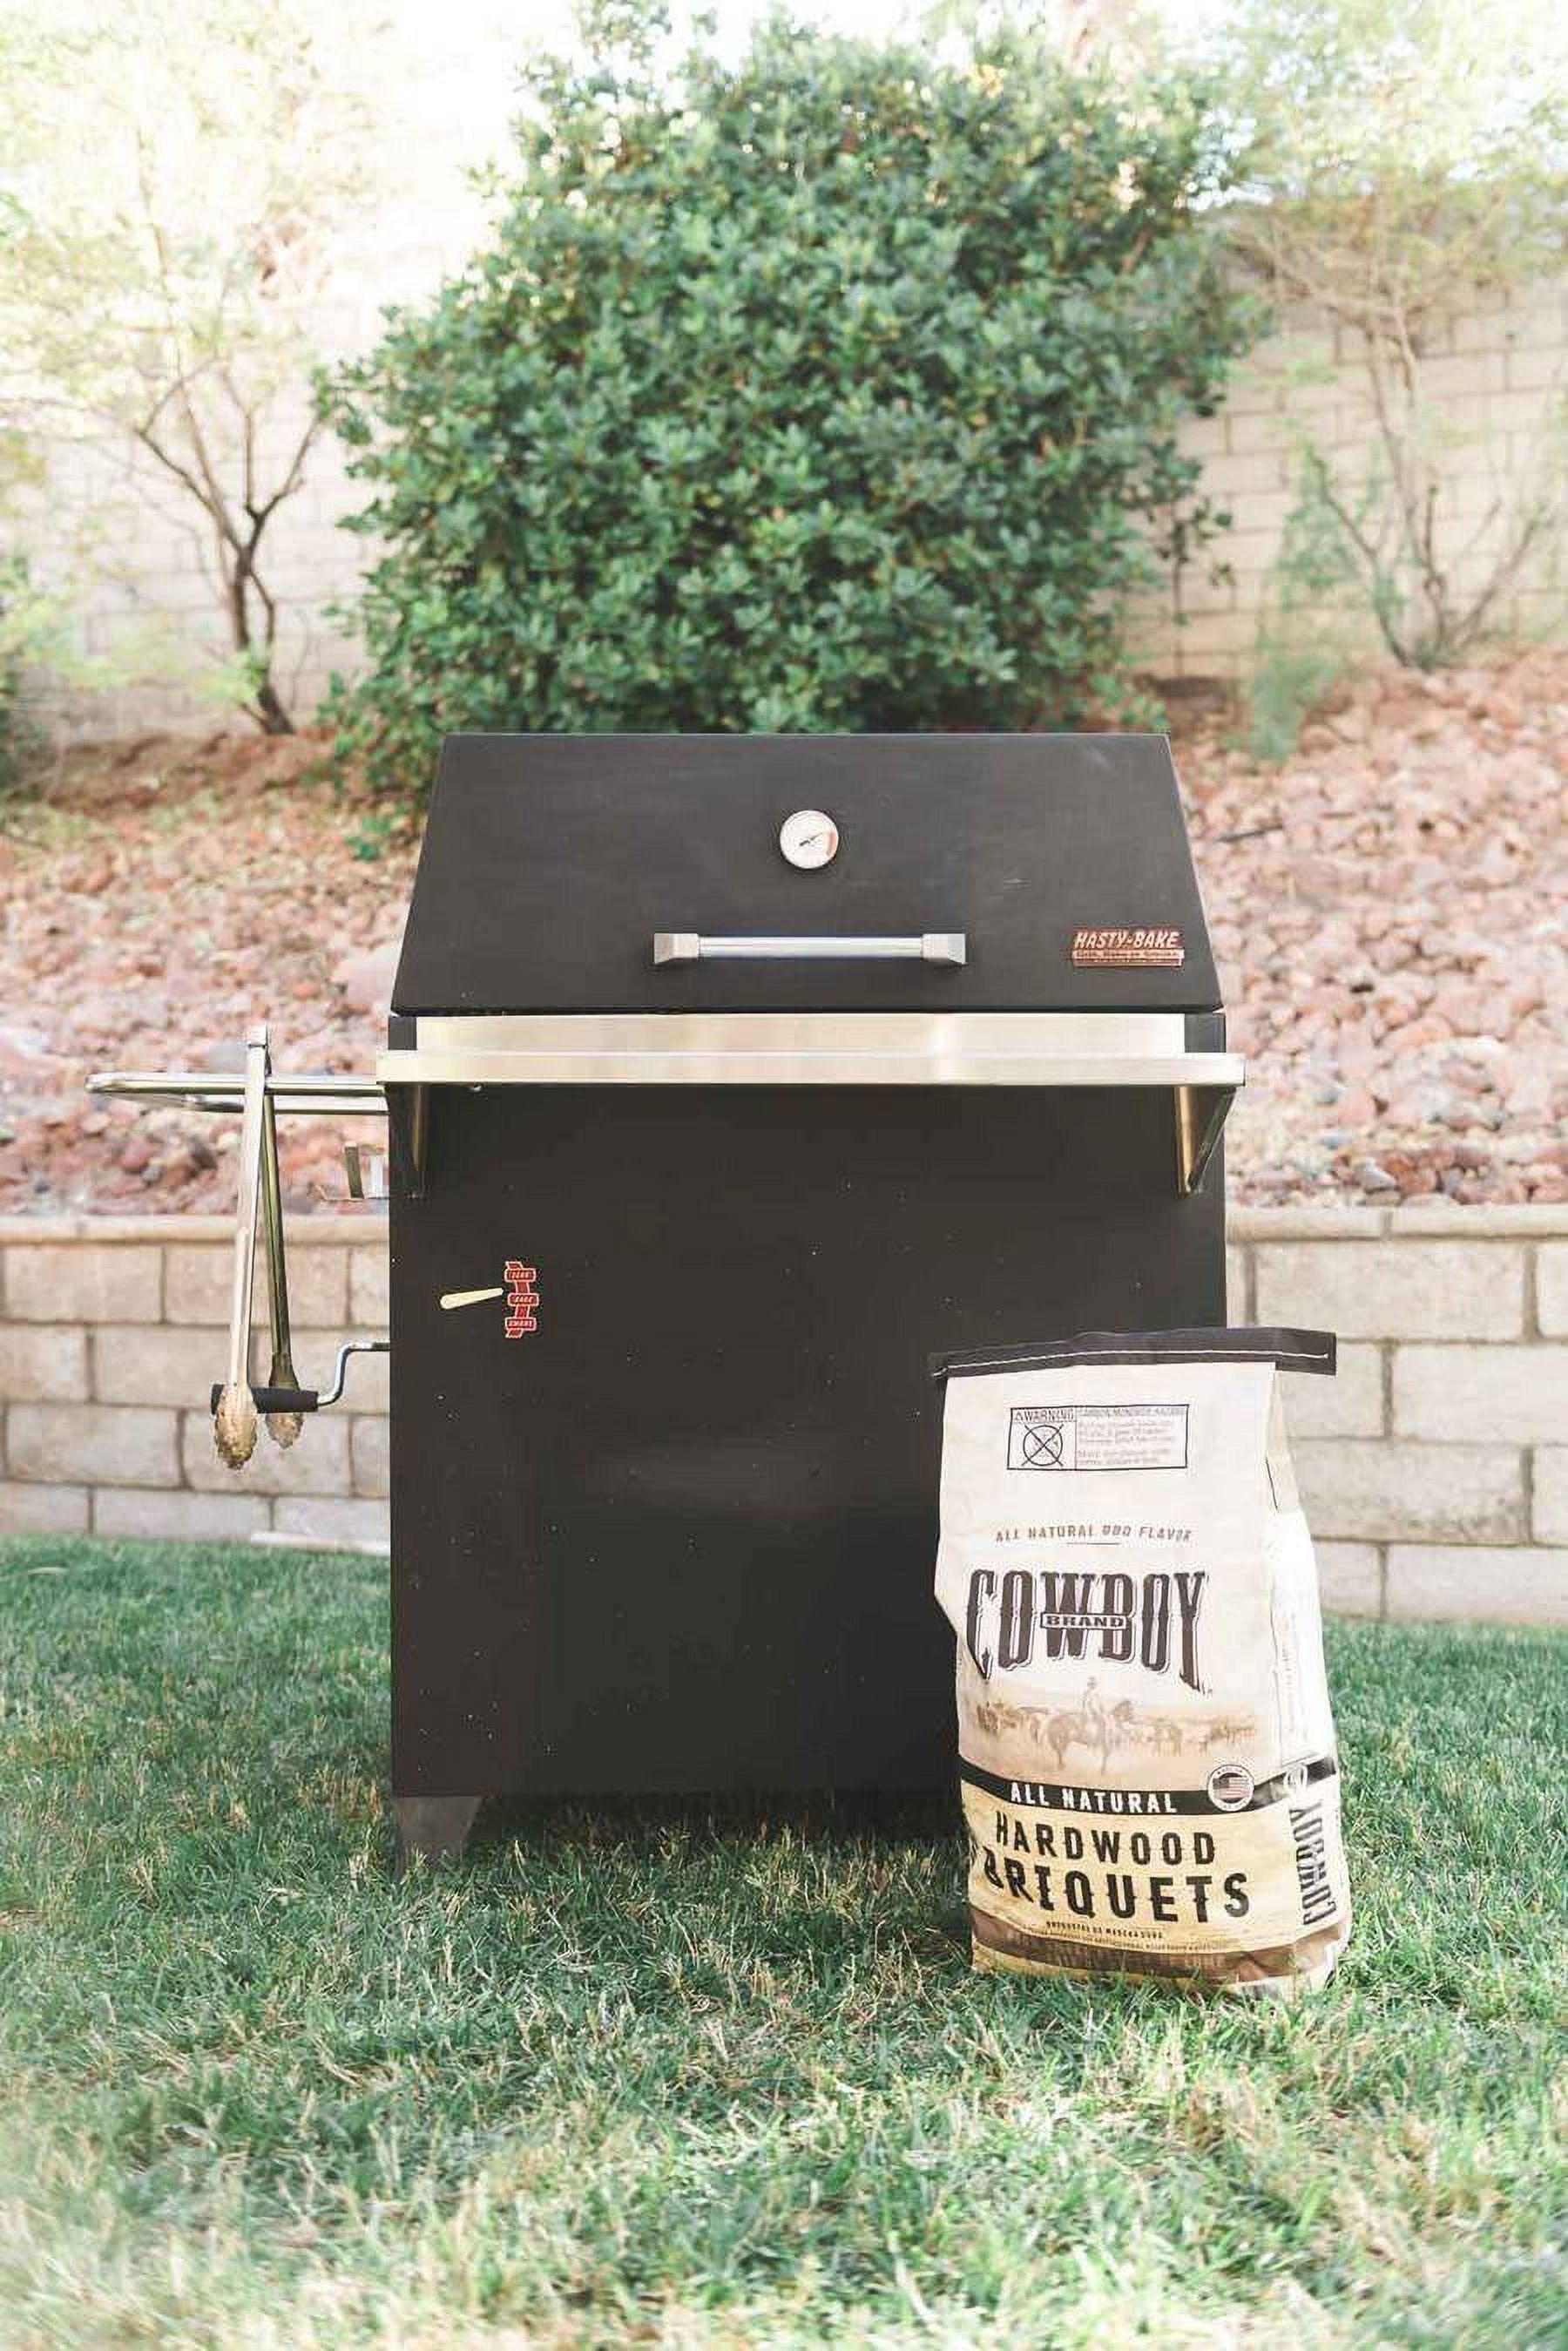 Cowboy Hardwood Charcoal Briquets, 20 Pounds Each (Pack of 2, 40 Pound Total) - image 3 of 11